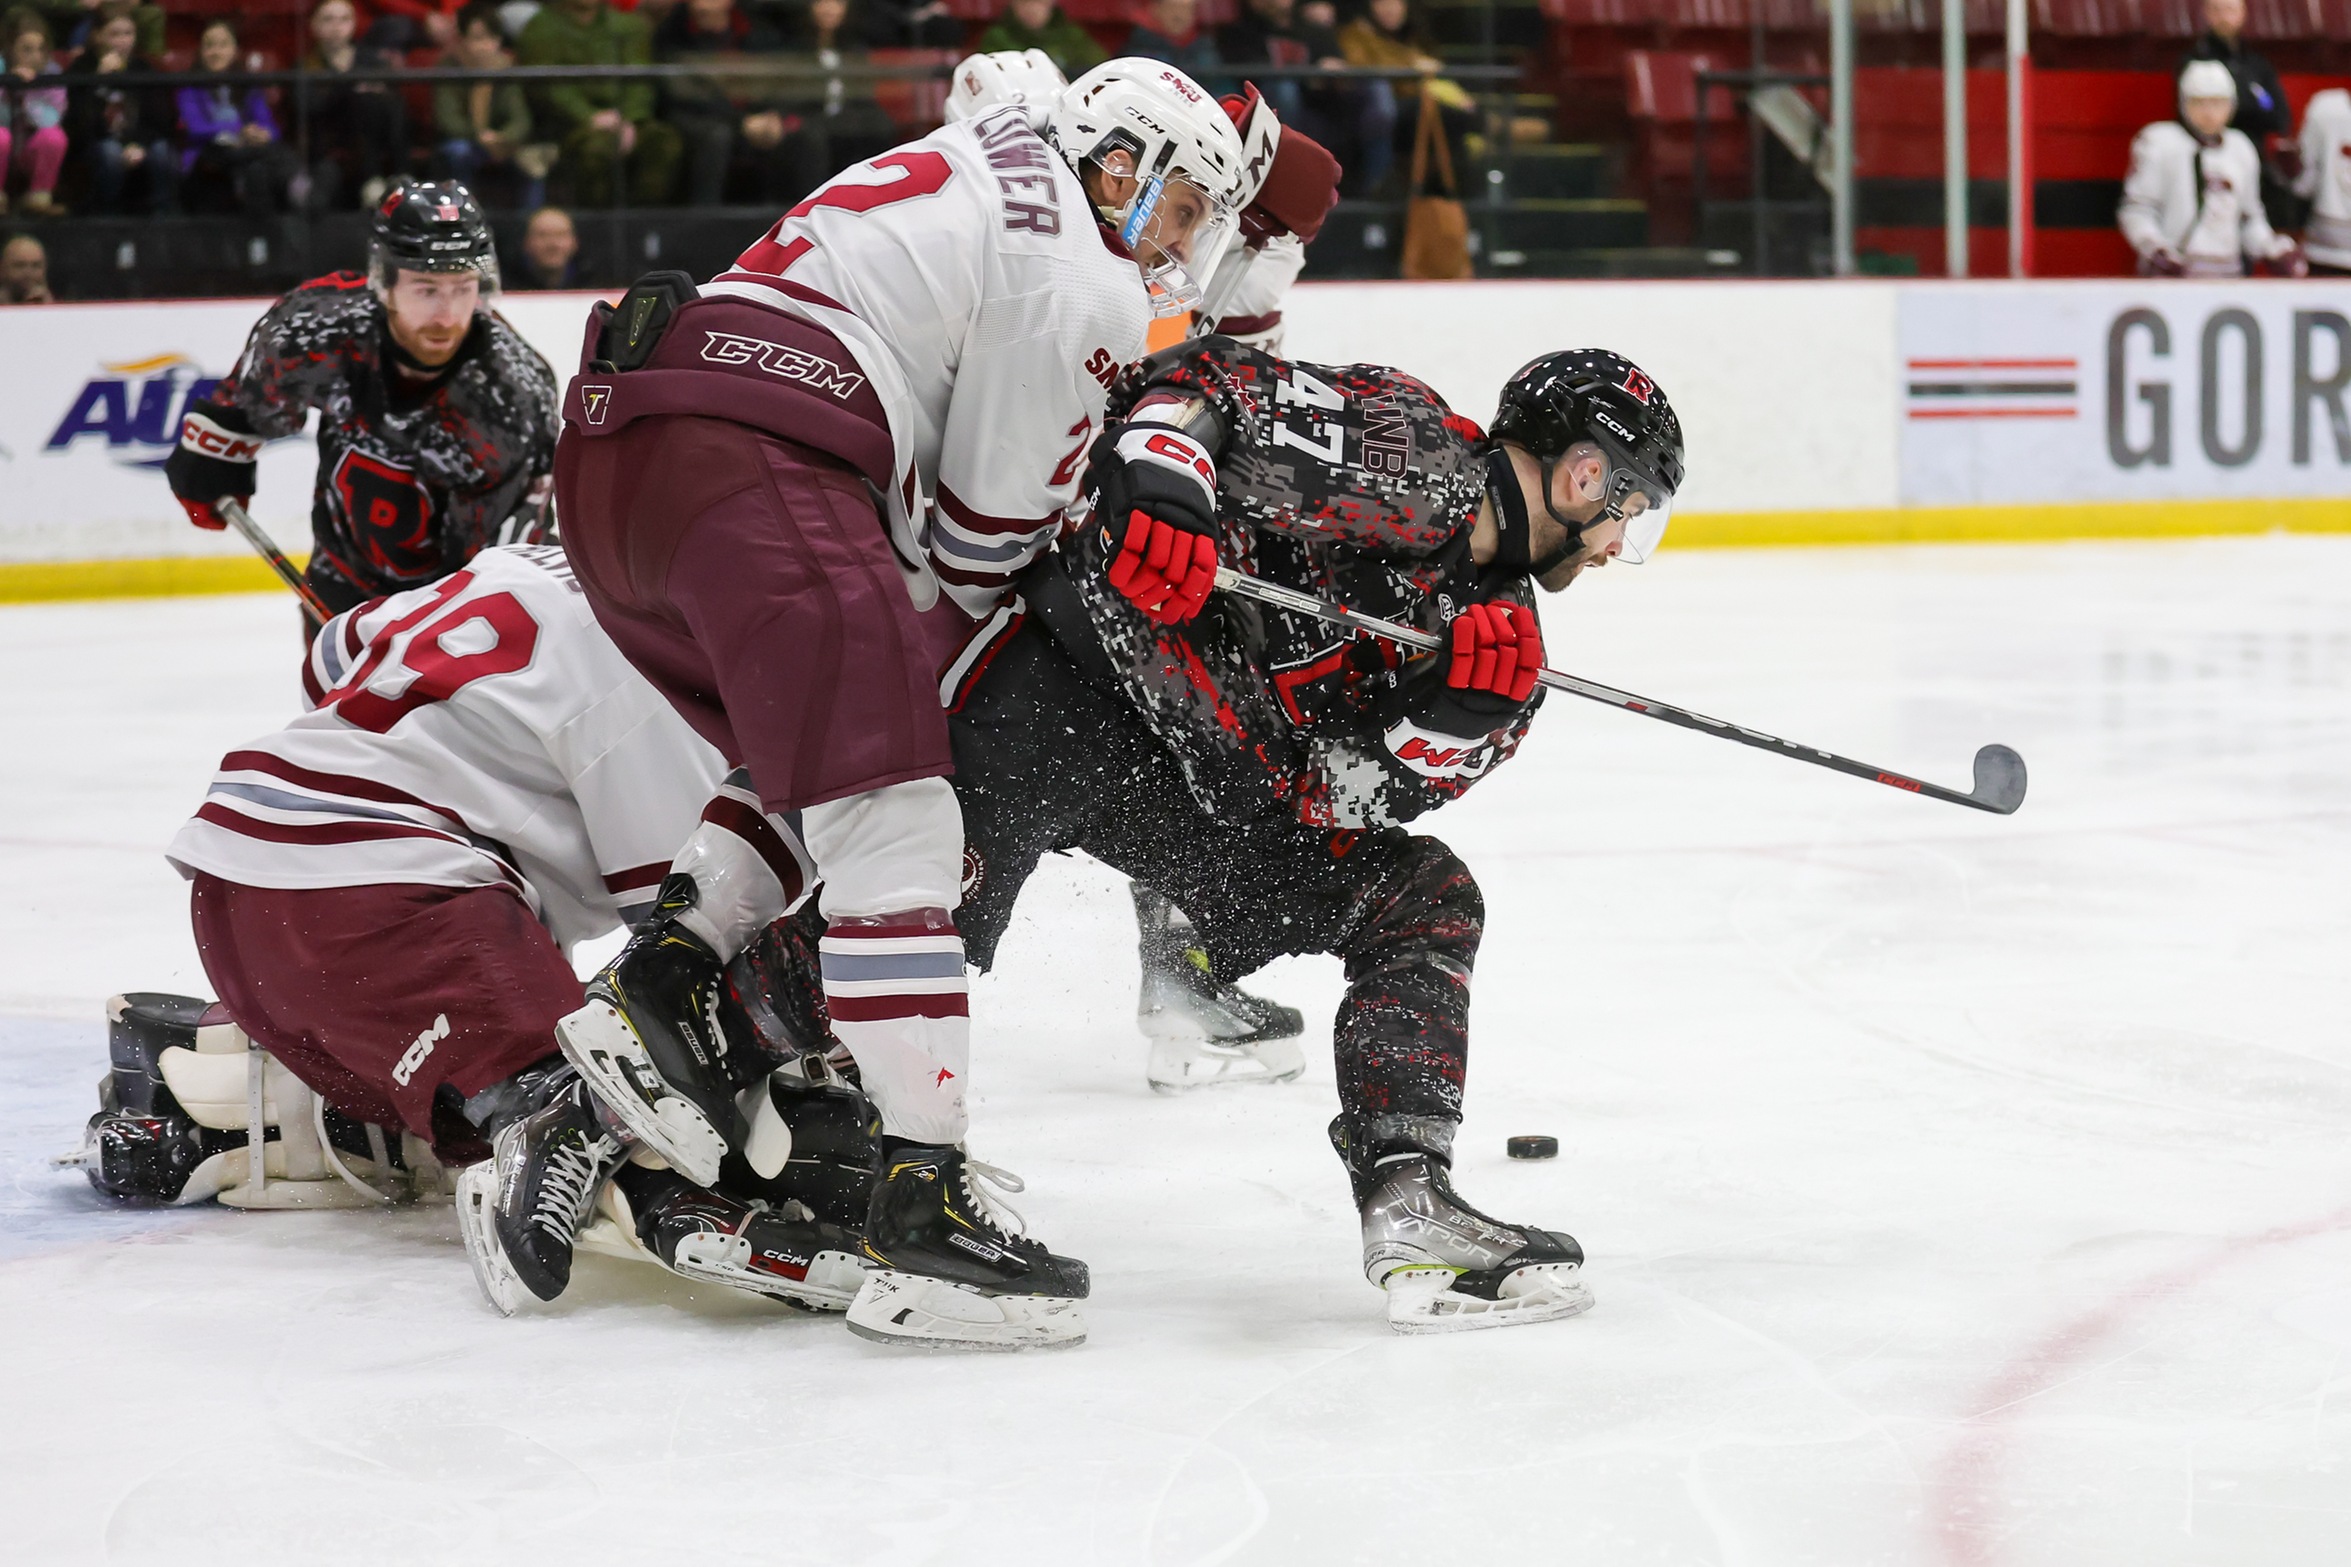 Top ranked REDS hang on to beat Huskies 3-2 in Fredericton